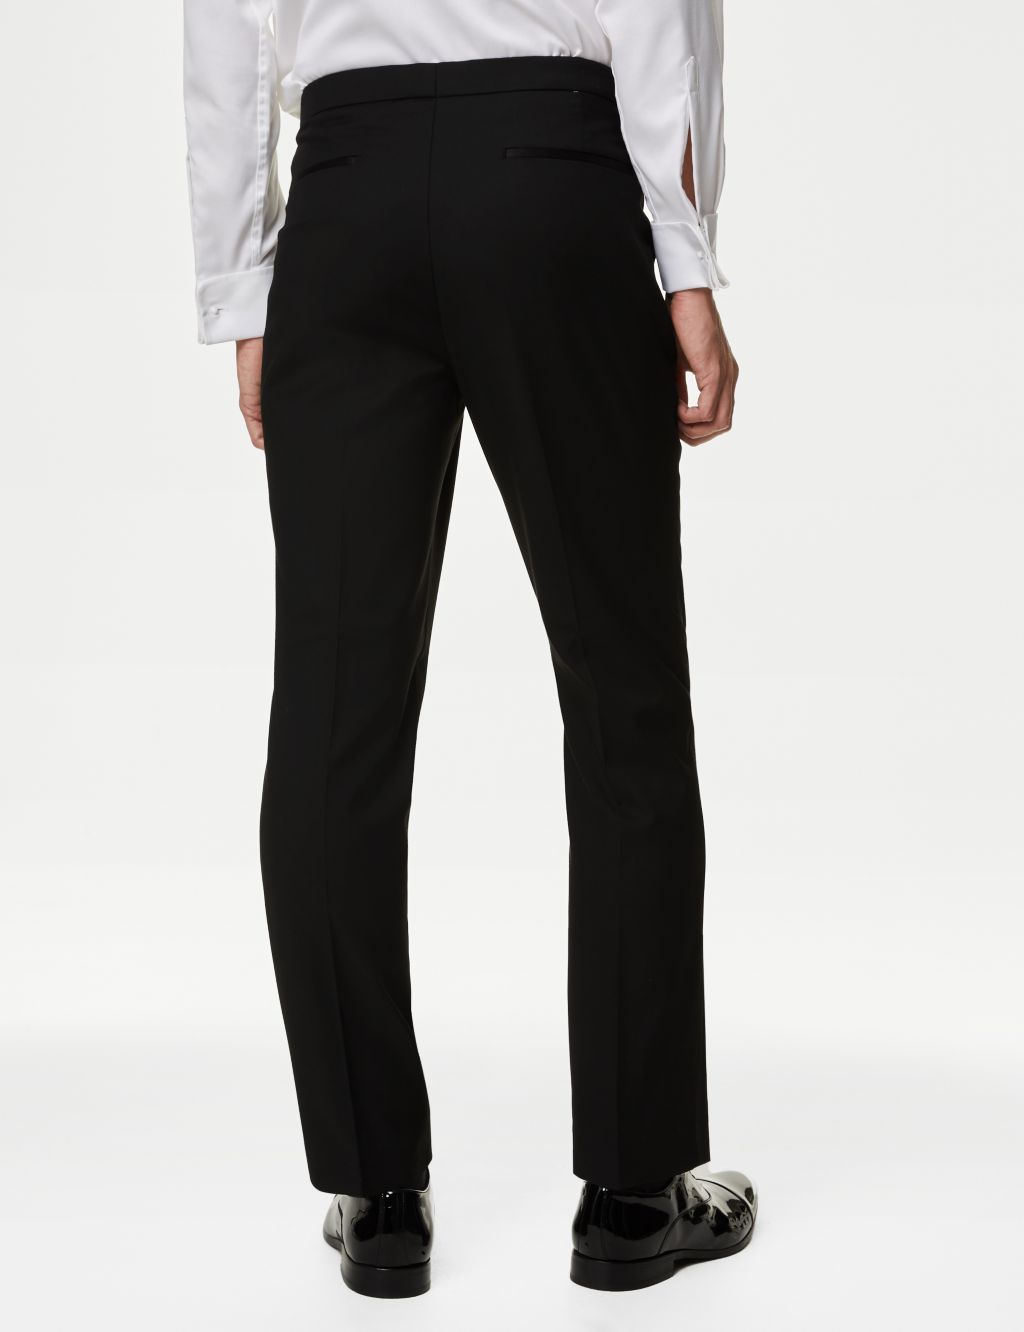 Skinny Fit Stretch Tuxedo Suit image 5